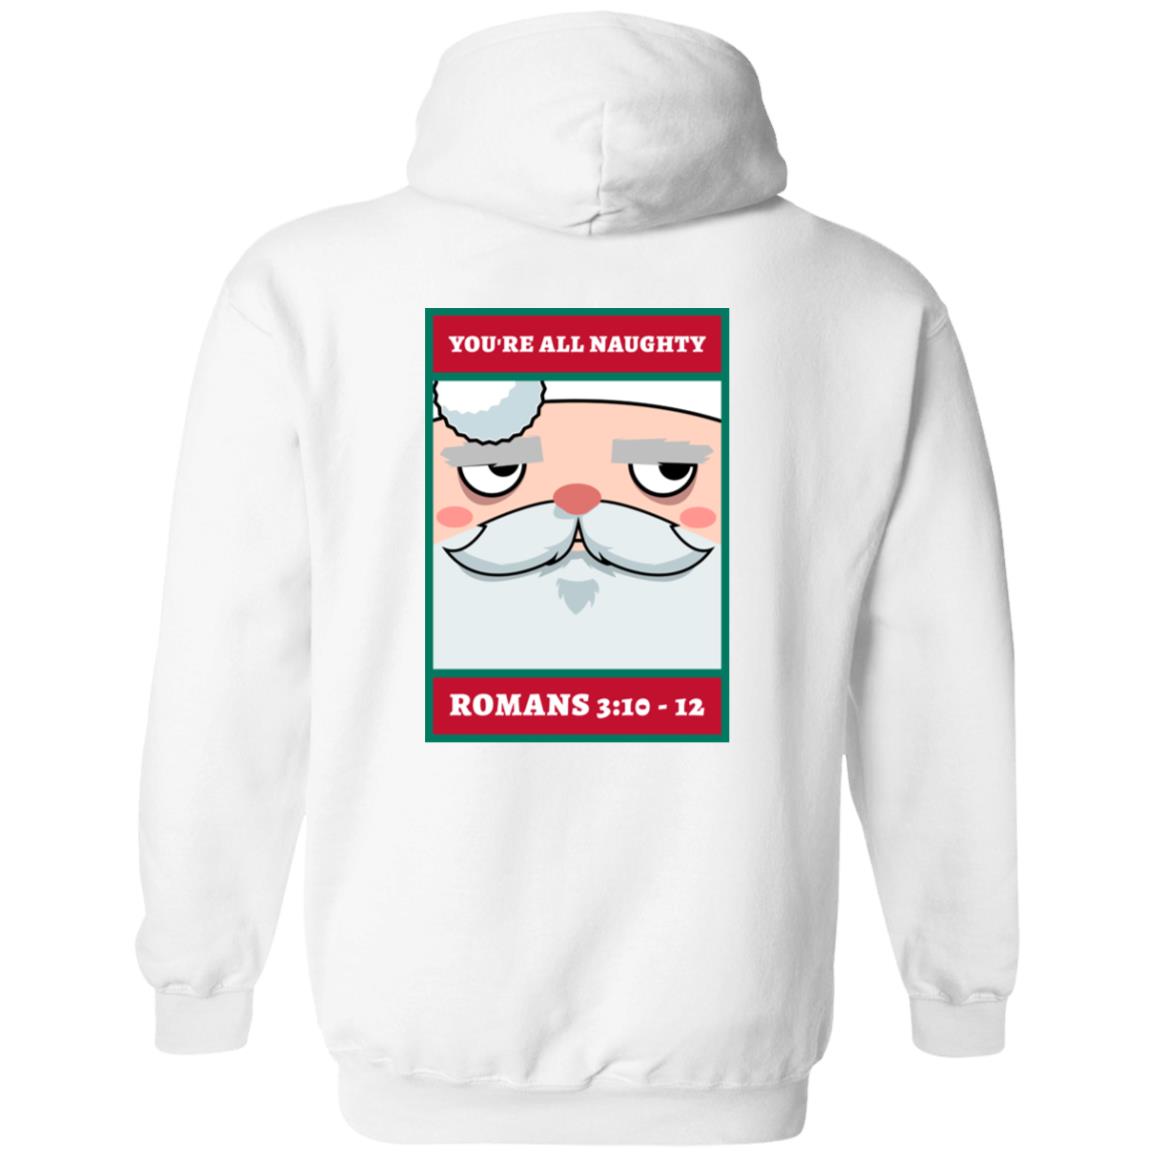 You're All Naughty (Unisex Hoodie)